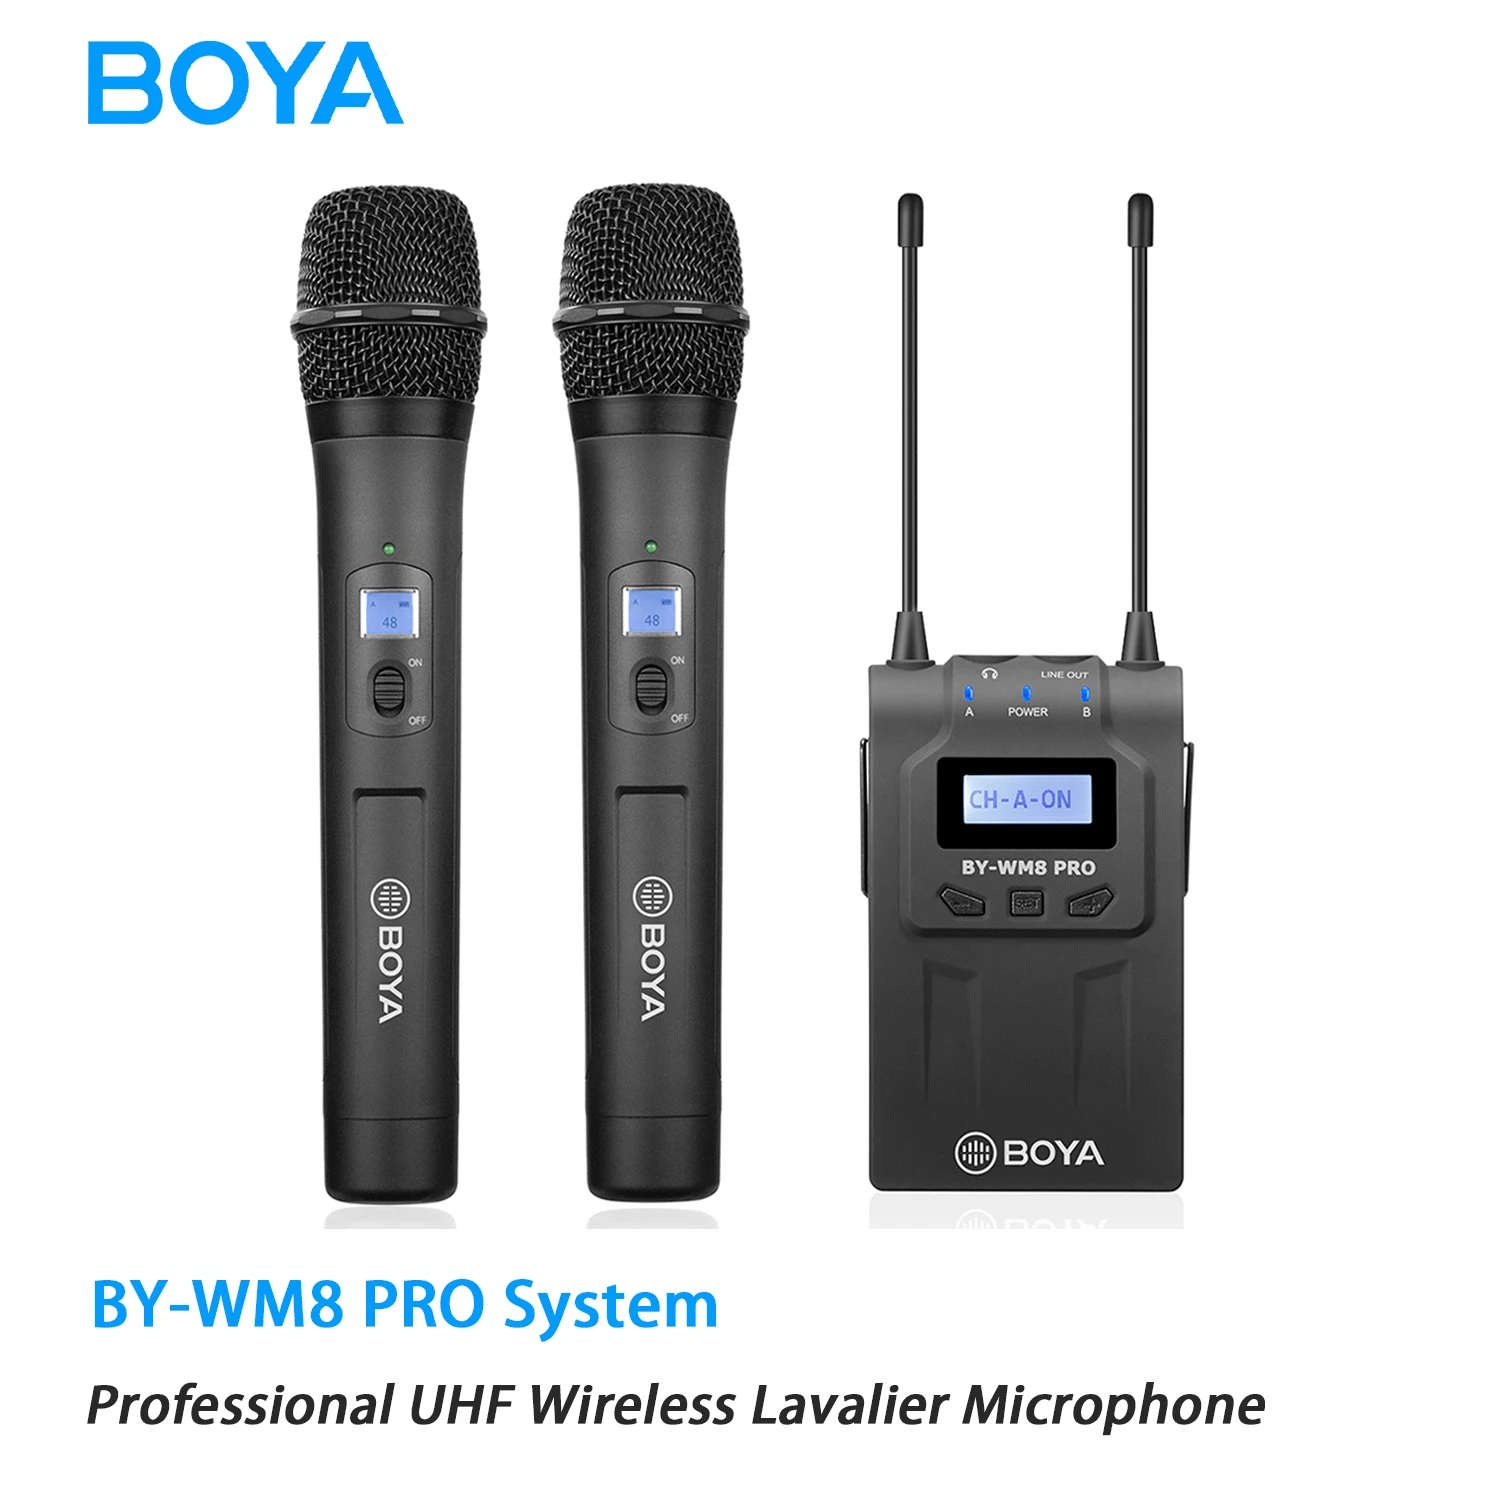 PRO　System　Camera　Handheld　Lavalier　Interview　BY-WM8　DSLR　BOYA　Professional　AliExpress　UHF　Mixer　Microphone　Condenser　Wireless　Live　Mic　For